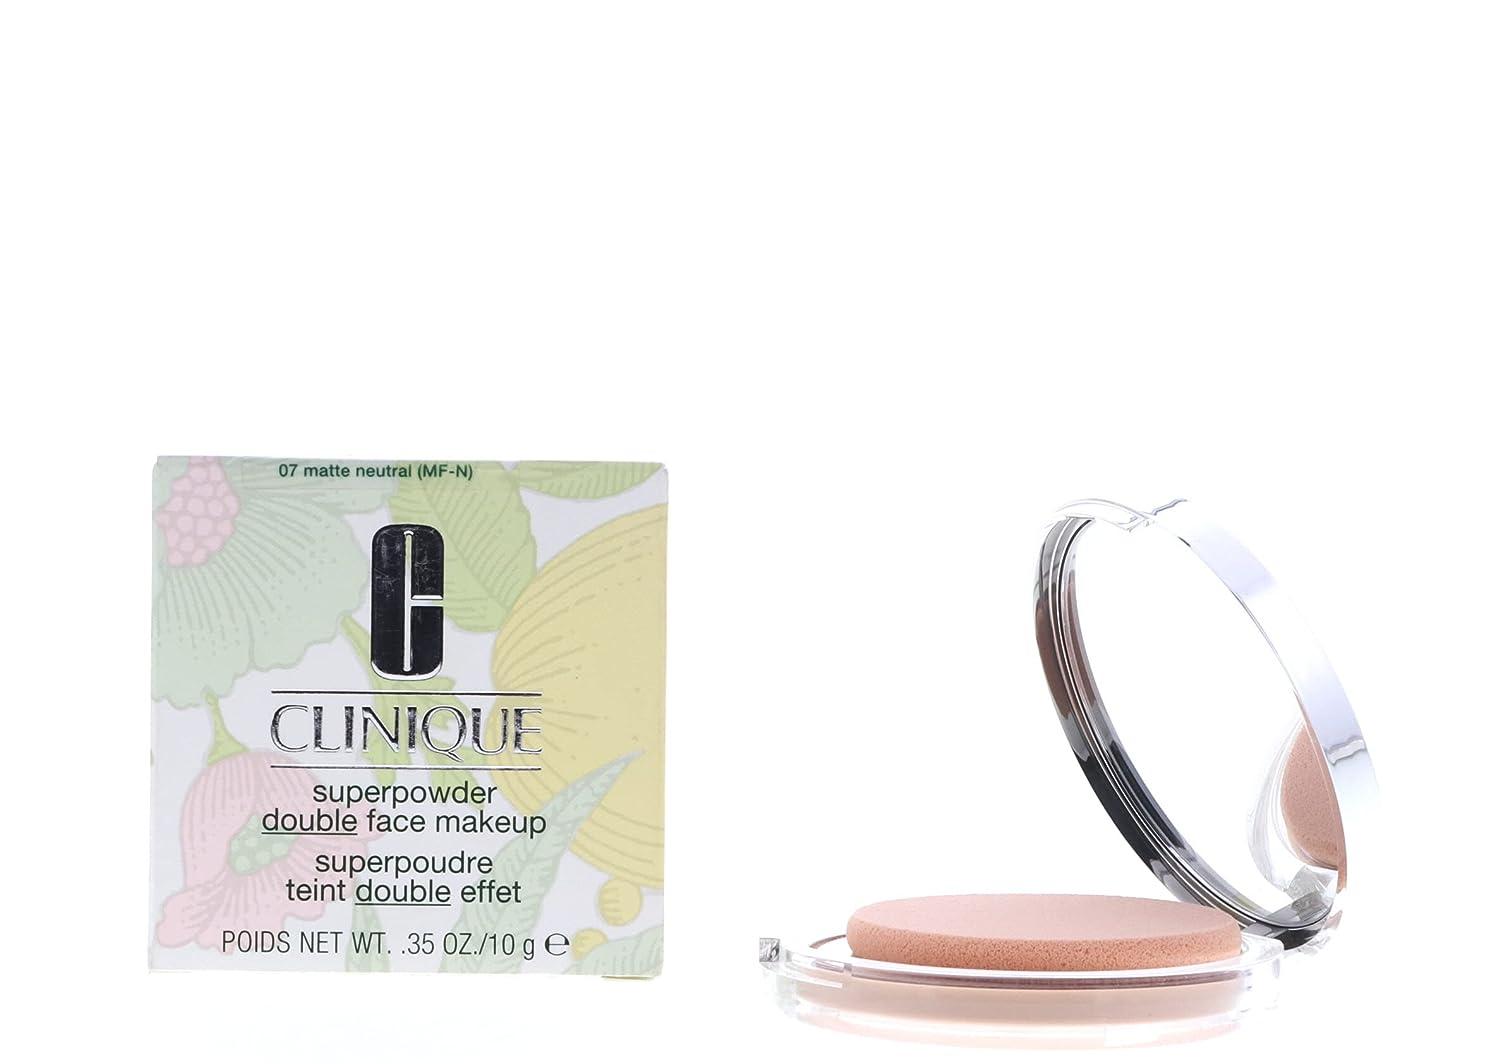  Clinique Superpowder Double Face Makeup, Long-Wearing 2-in-1  Powder and Foundation, Extra-Cling Formula for Double Coverage, Free of  Parabens, Phthalates, and Sulfates